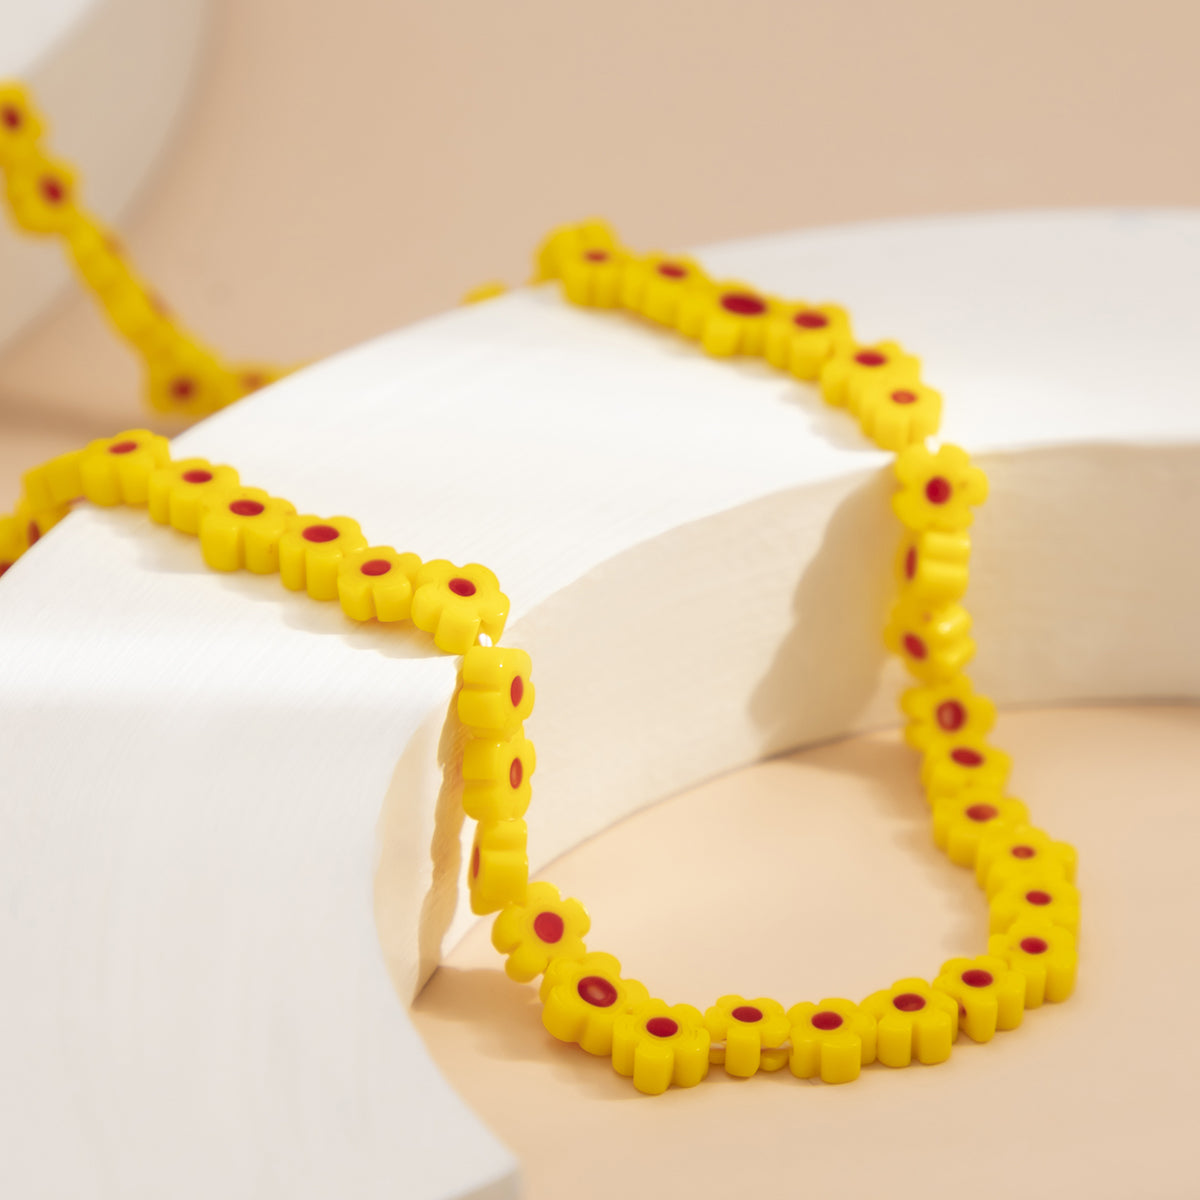 Yellow Acrylic & Silver-Plated Flower Necklace